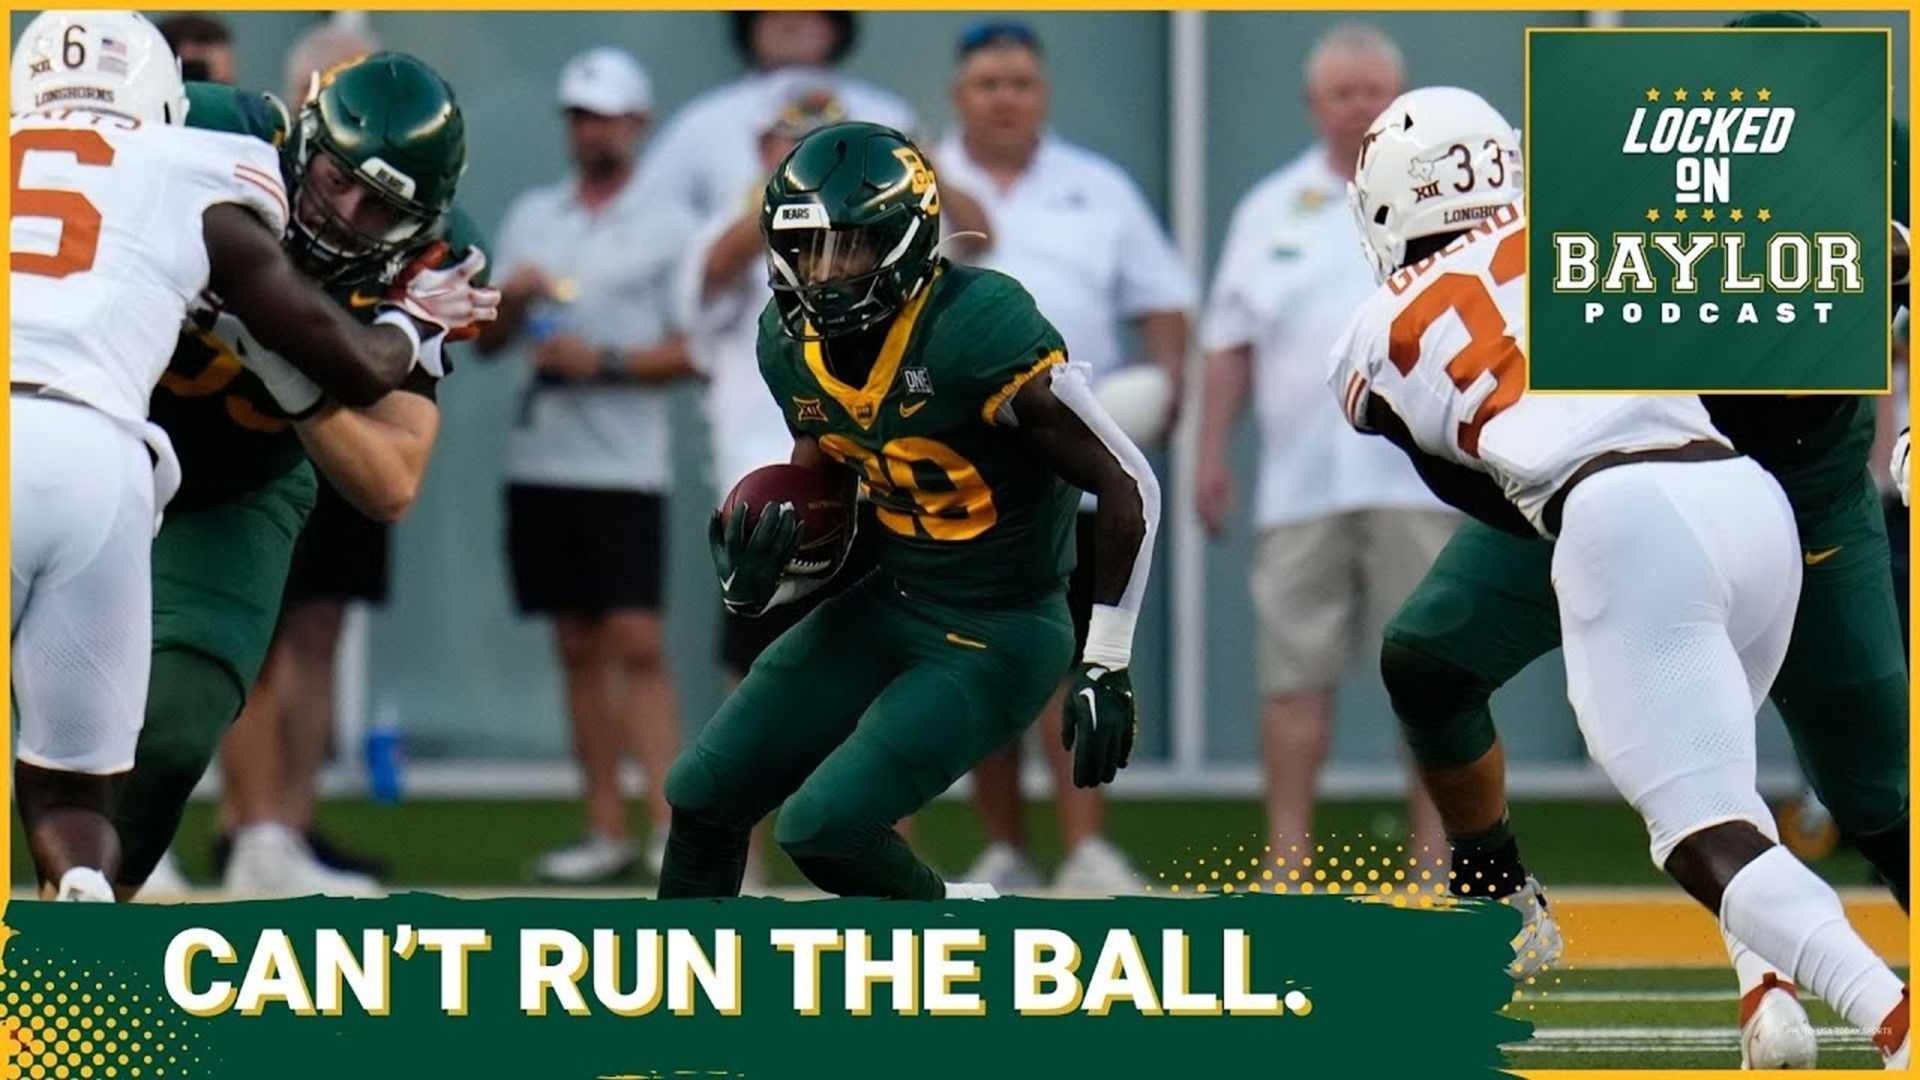 Four games into the season and neither Richard Reese nor Dominic Richardson has rushed for over 100 yards for Baylor. Cam Stuart breaks down what is going wrong